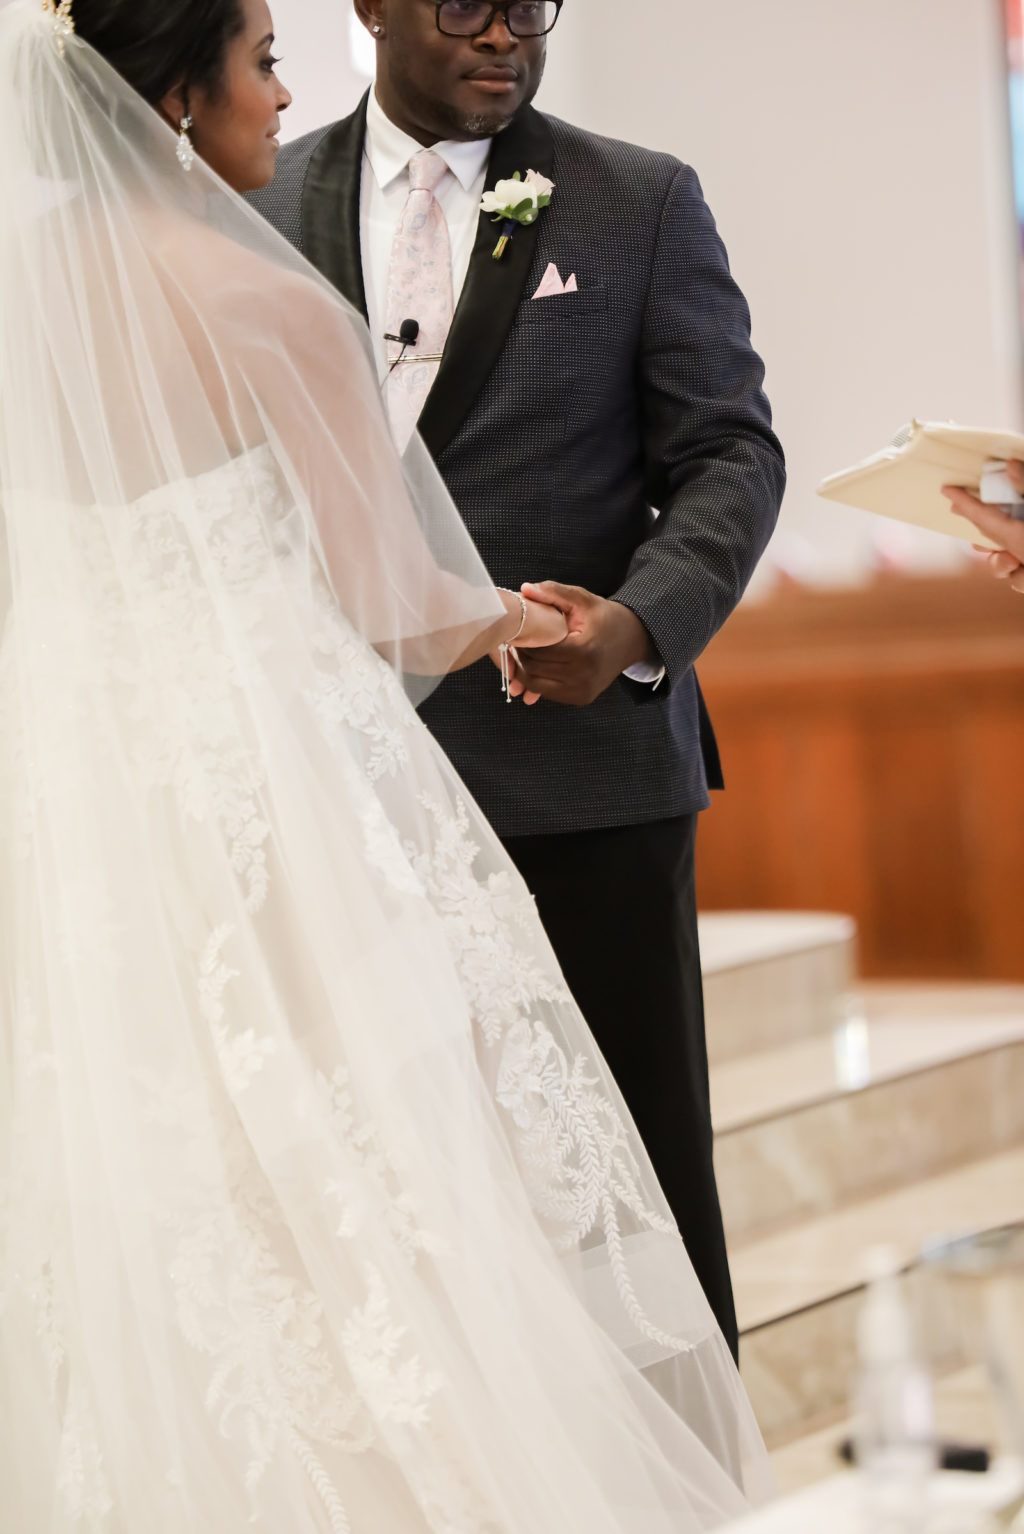 Tampa Bay Bride and Groom Exchange Vows in Church Ceremony | Florida Wedding Photographer Lifelong Photography Studio